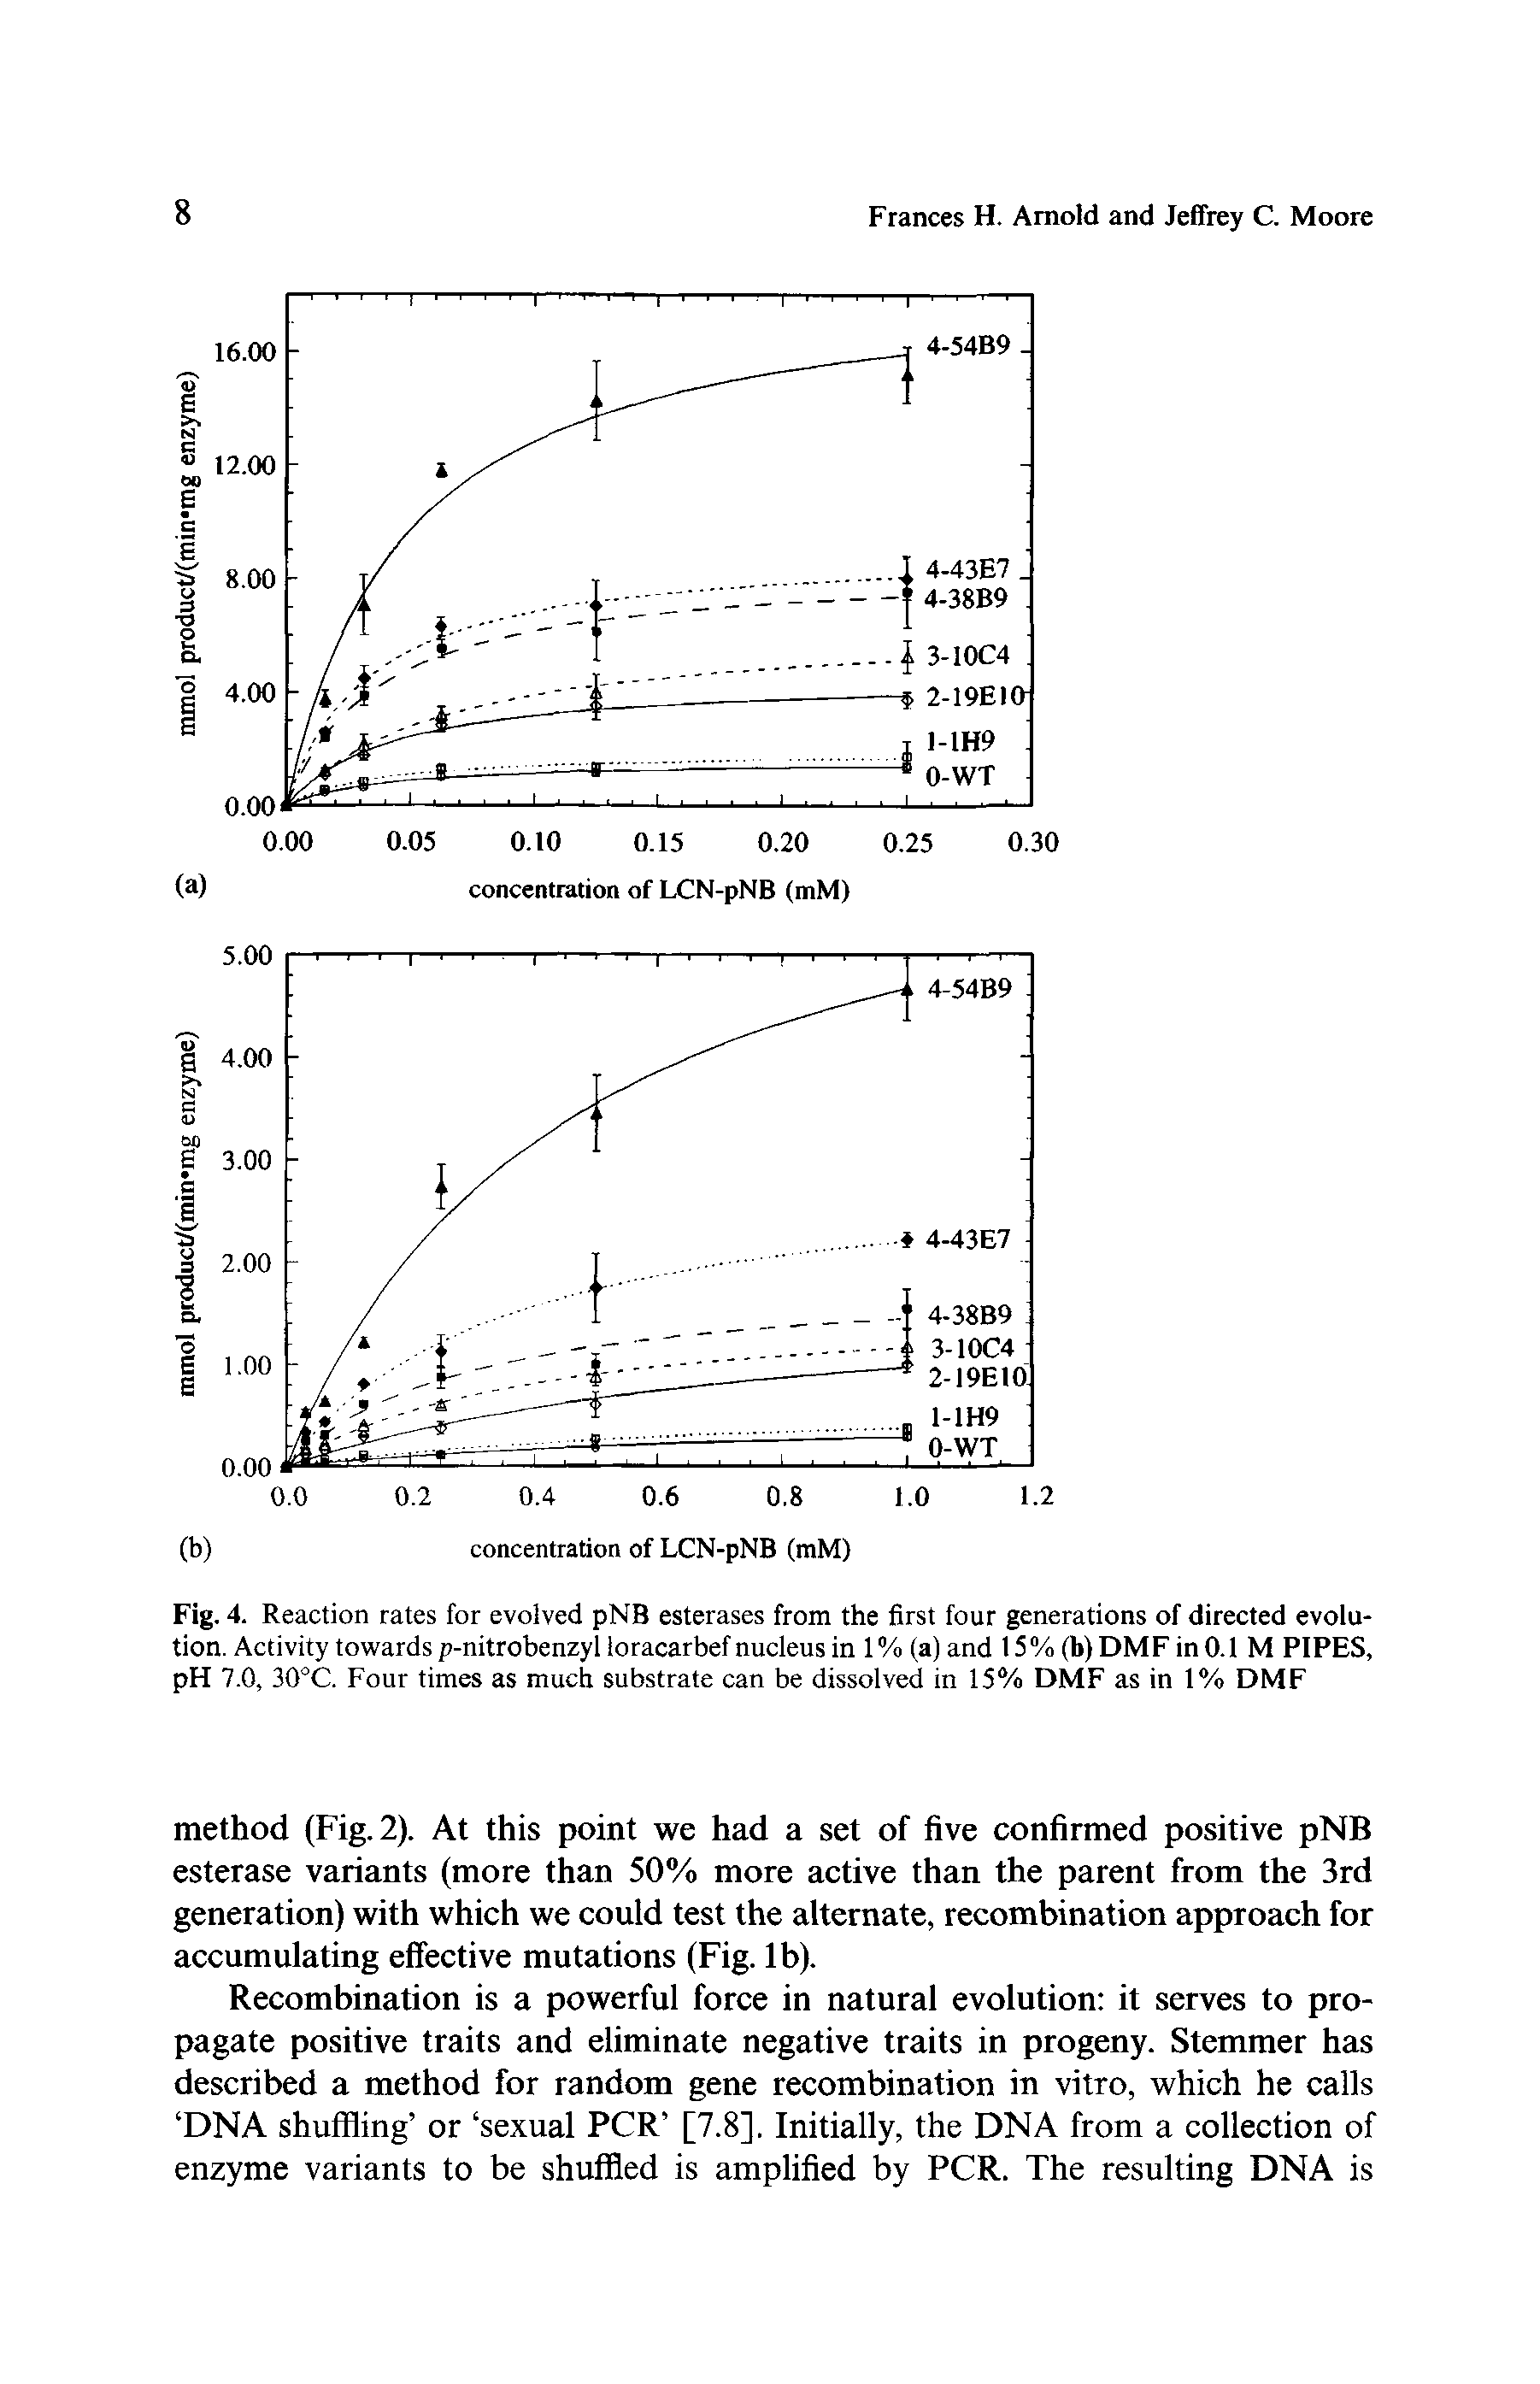 Fig. 4. Reaction rates for evolved pNB esterases from the first four generations of directed evolution. Activity towards p-nitrobenzyl loracarbef nucleus in 1% (a) and 15% (b)DMF in 0.1 M PIPES, pH 7.0, 30°C. Four times as much substrate can be dissolved in 15% DMF as in 1% DMF...